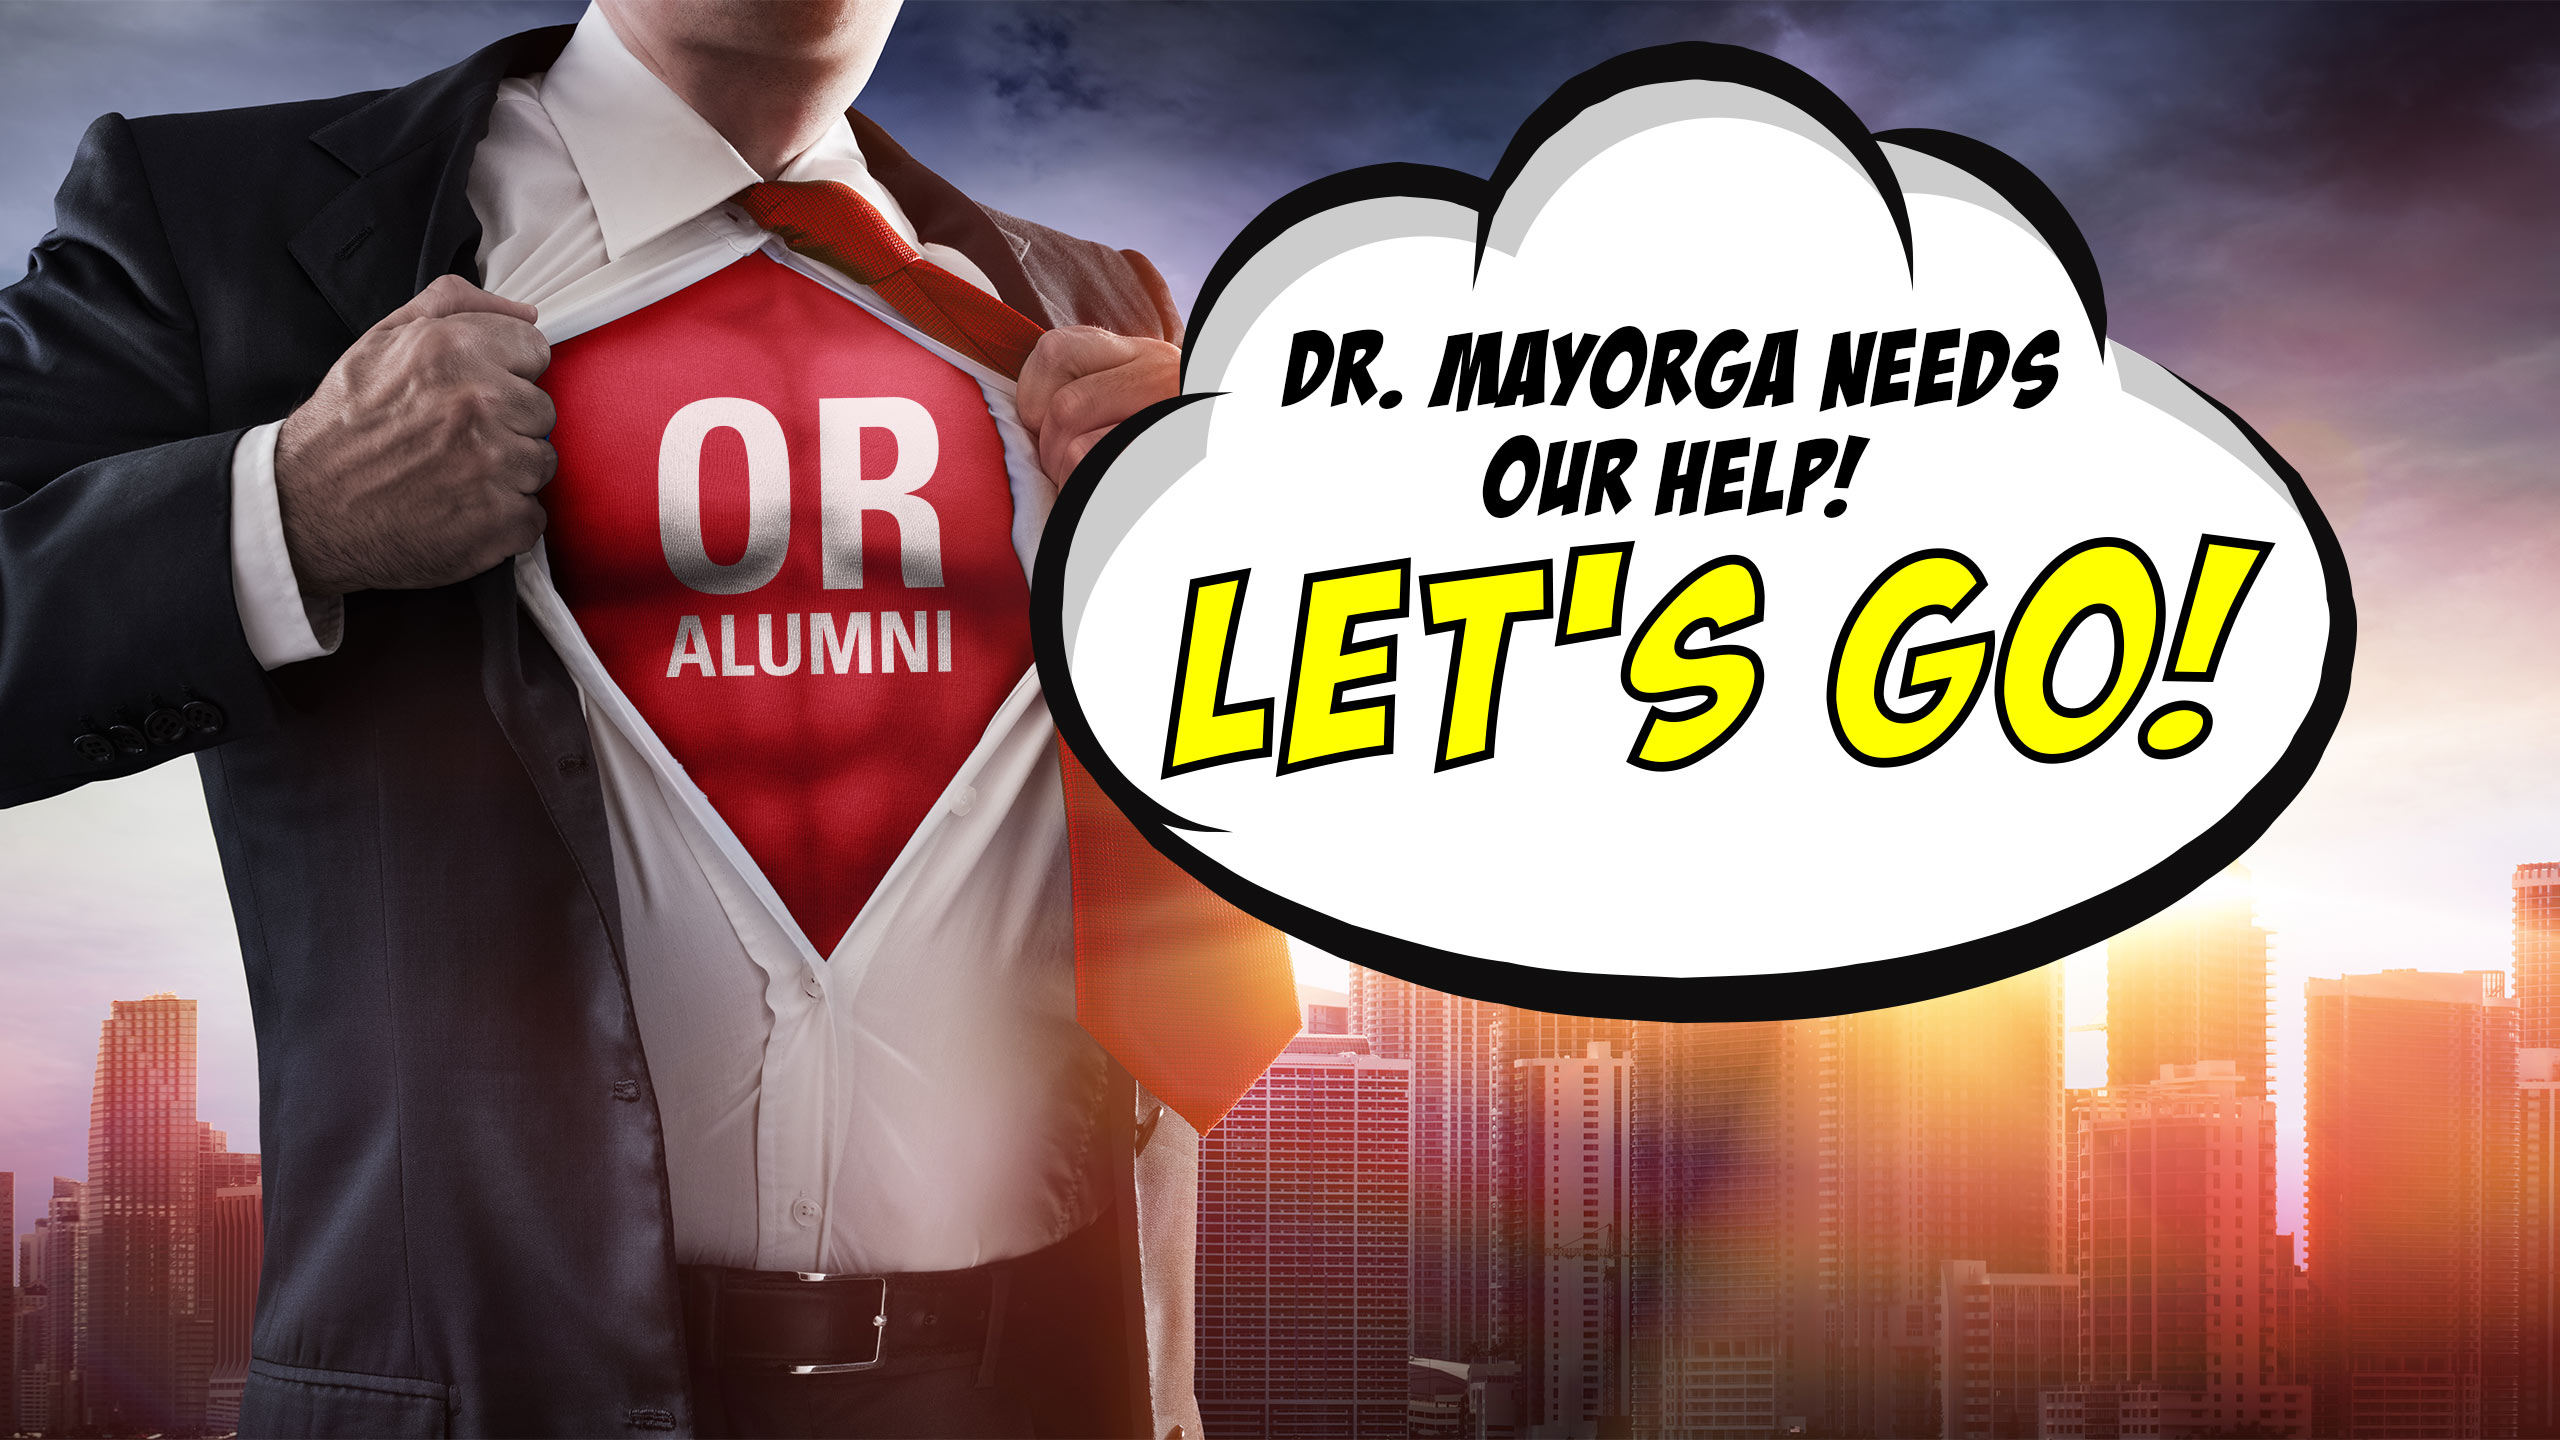 A superhero with the words OR Alumni on his chest says, "Dr. Mayorga needs our help! Let's go!"